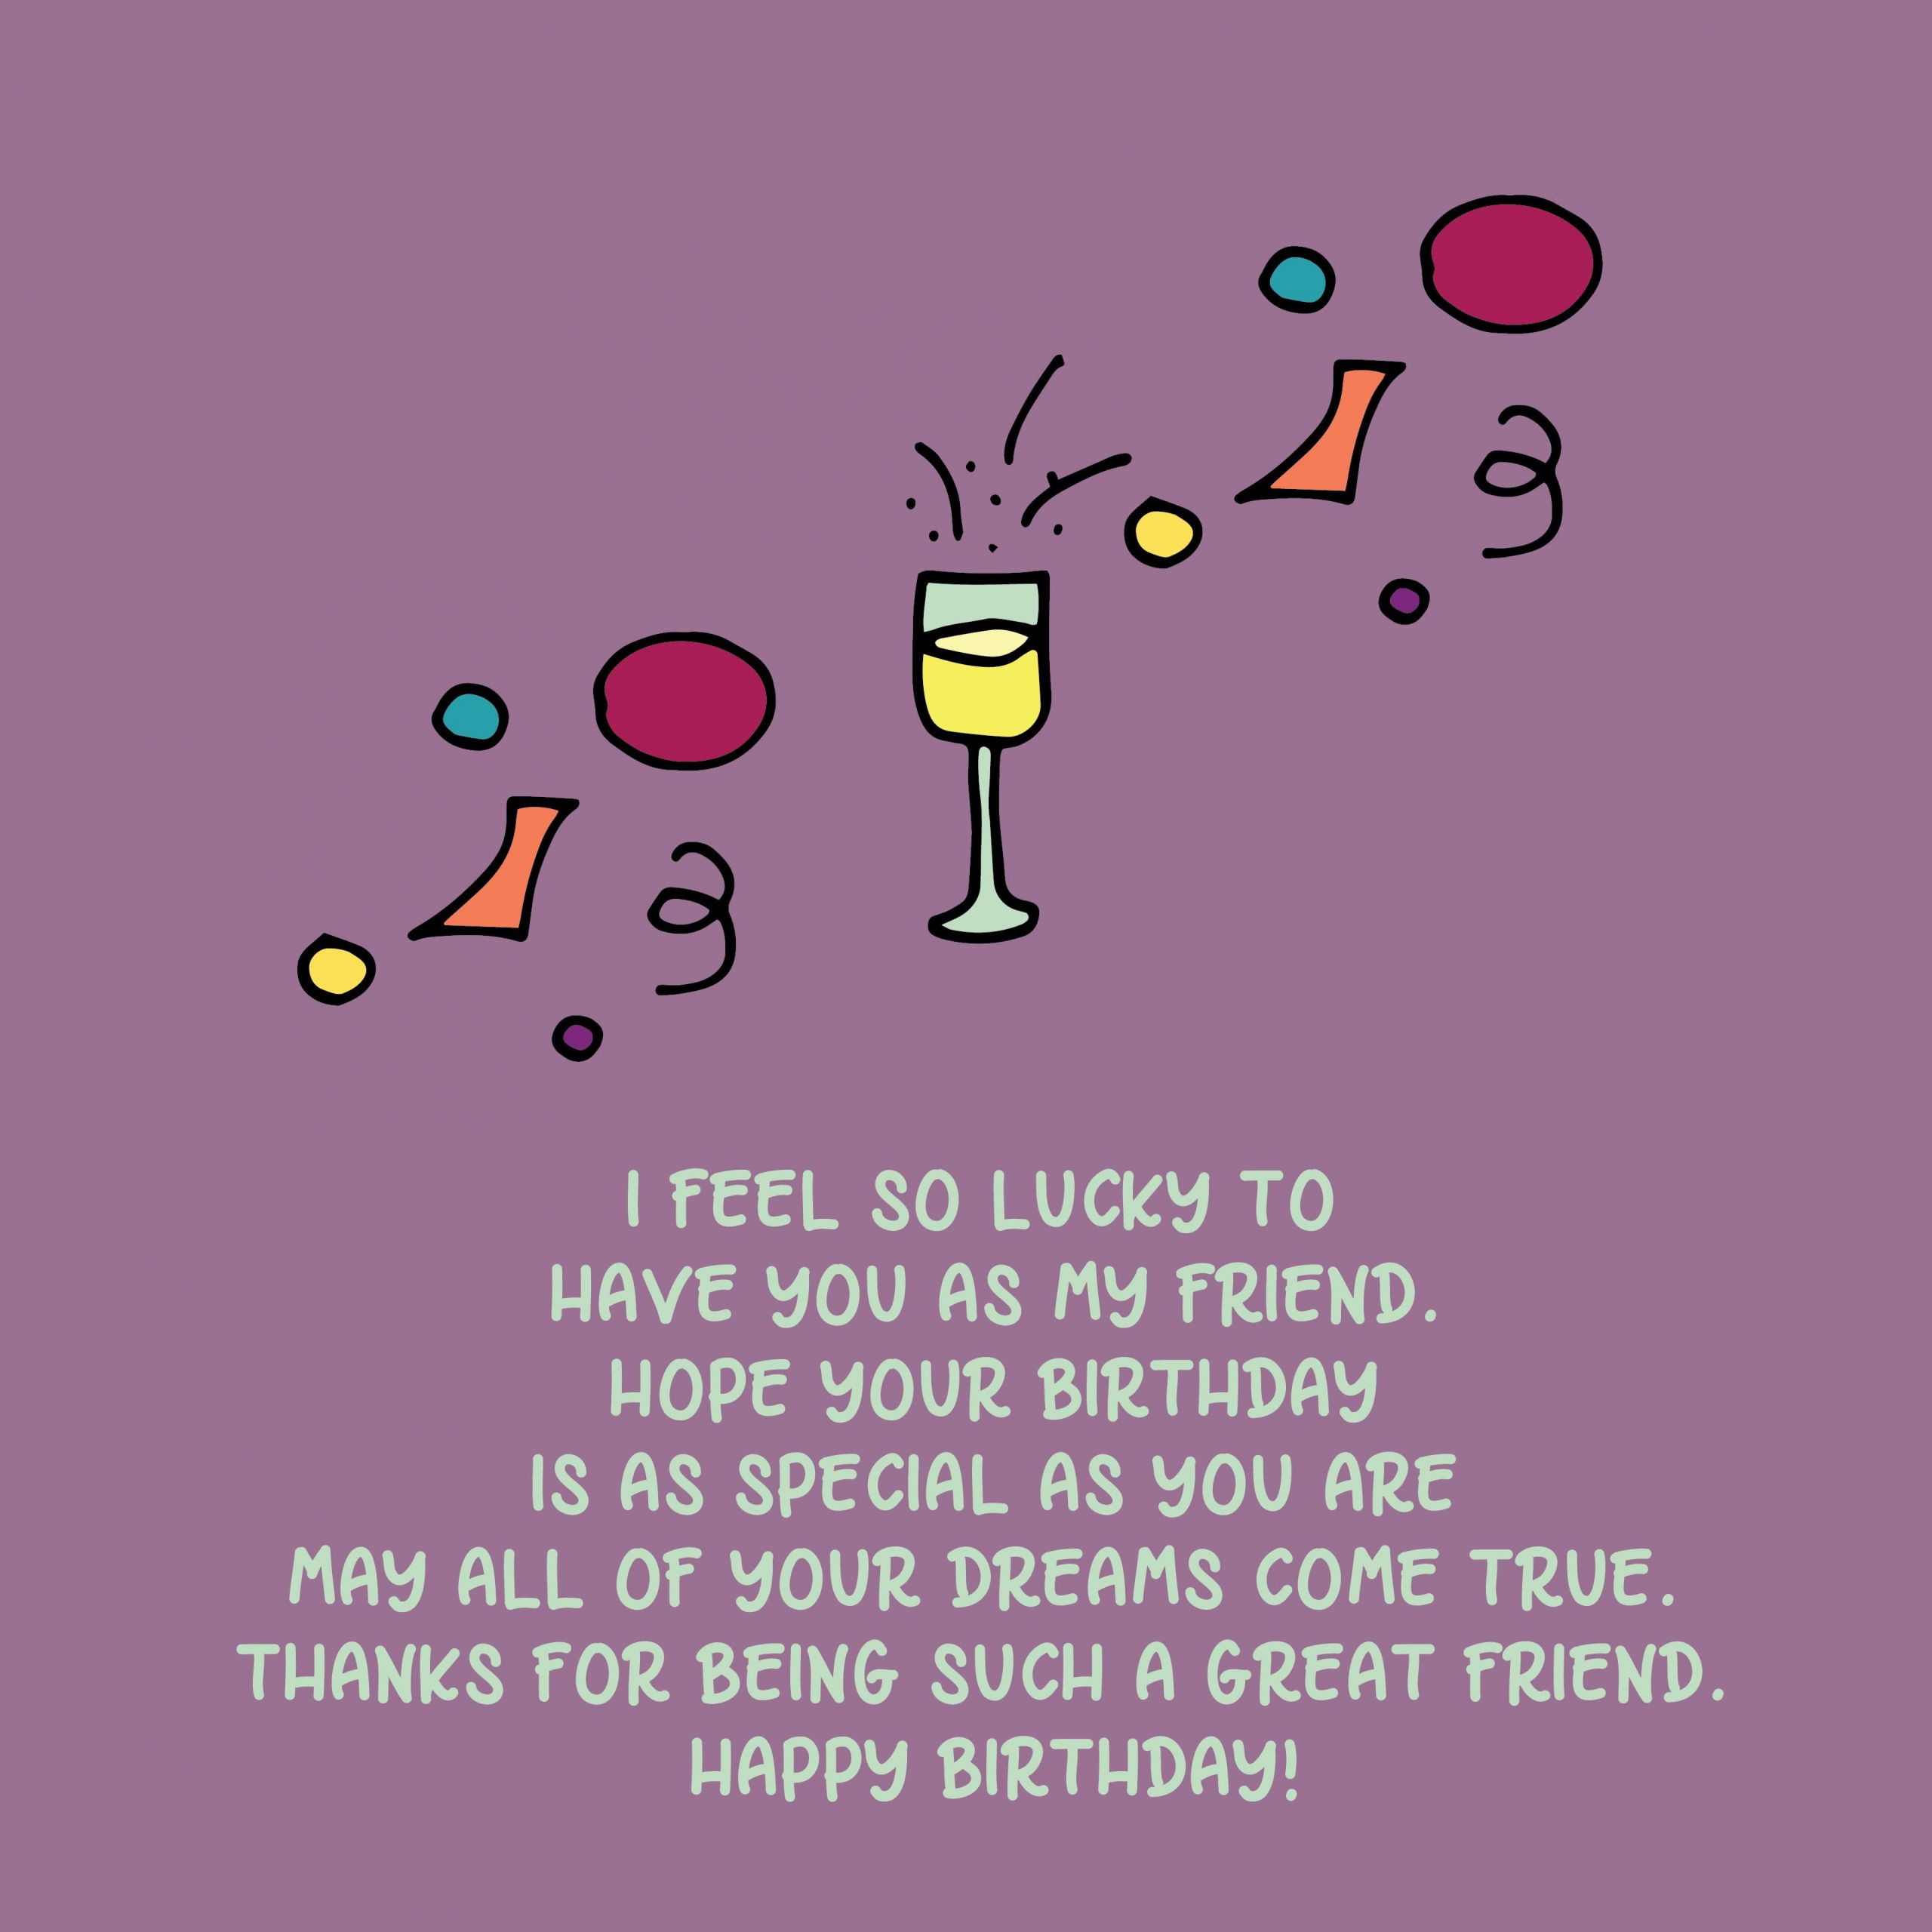 Happy Birthday Friend Images With Quotes
 Happy Birthday Quotes and Wishes for Friends – Top Happy